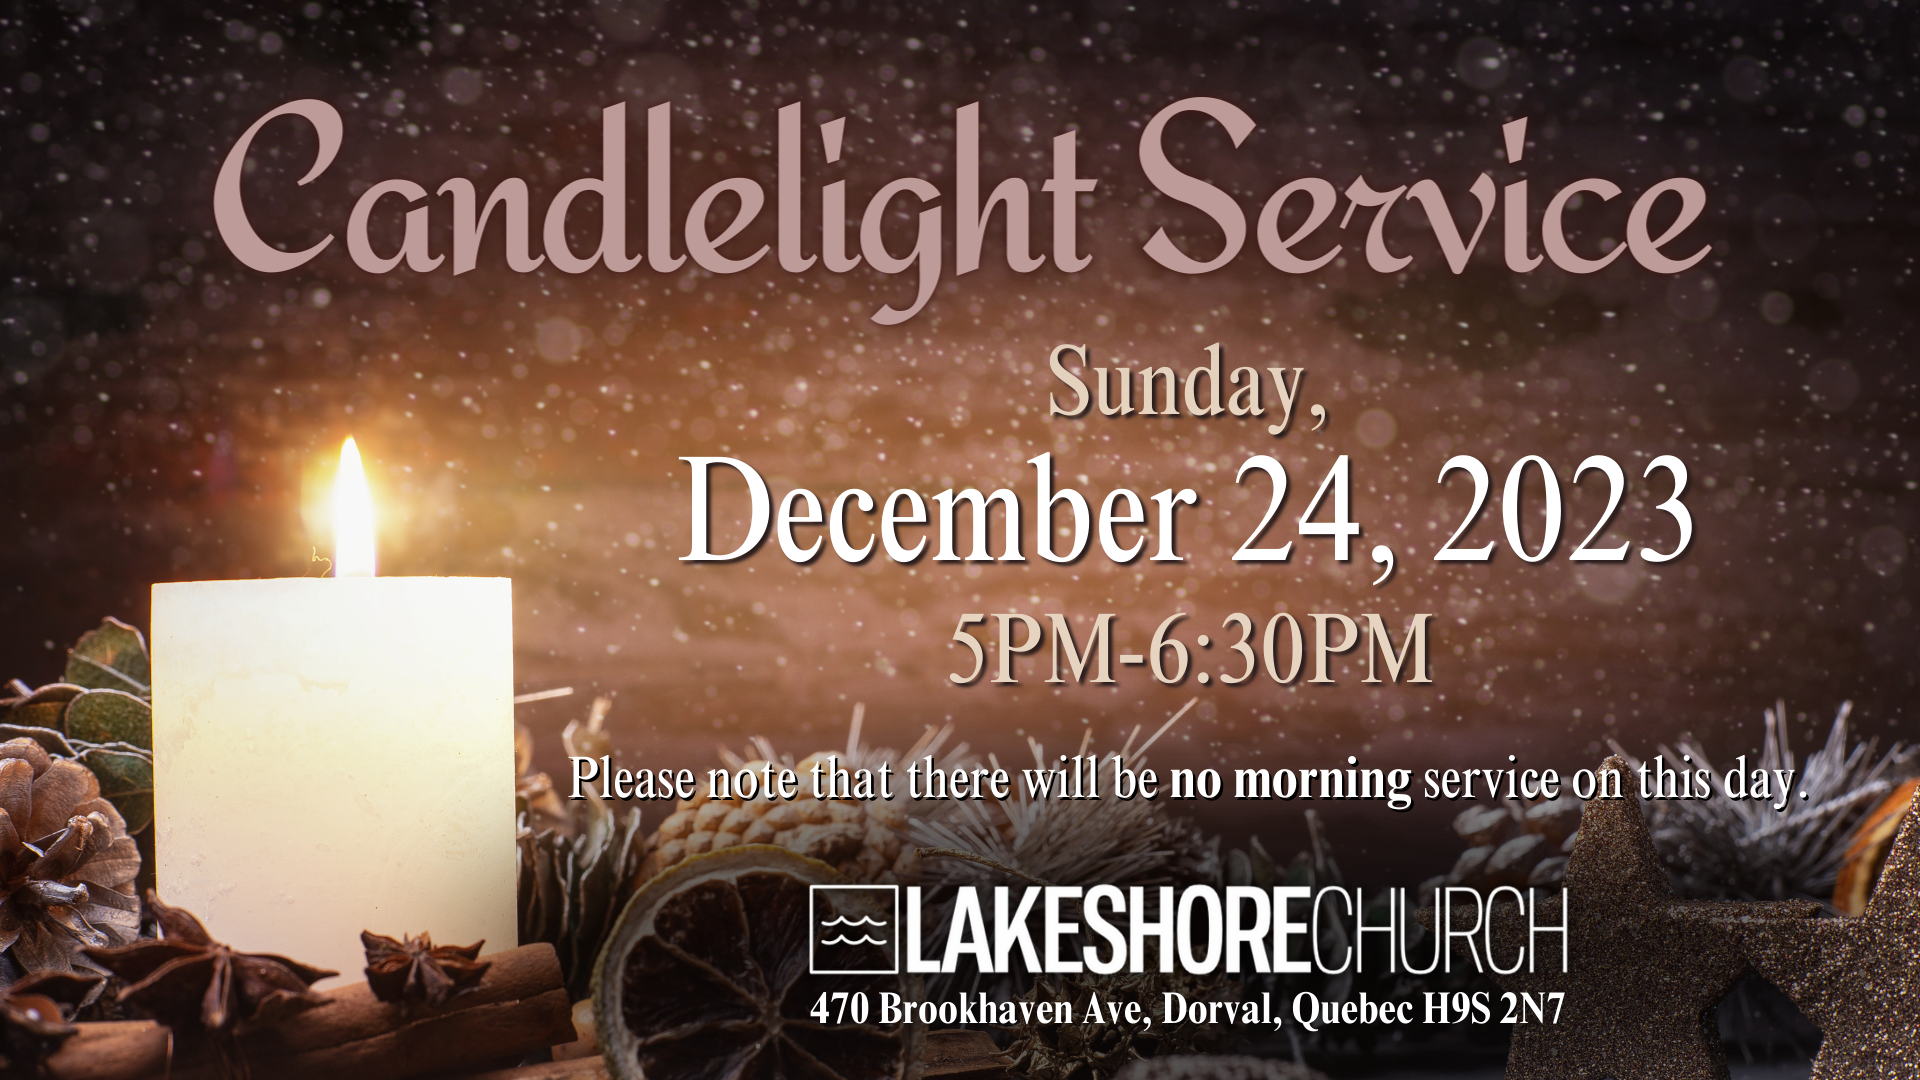 Featured image for “Candlelight Service”